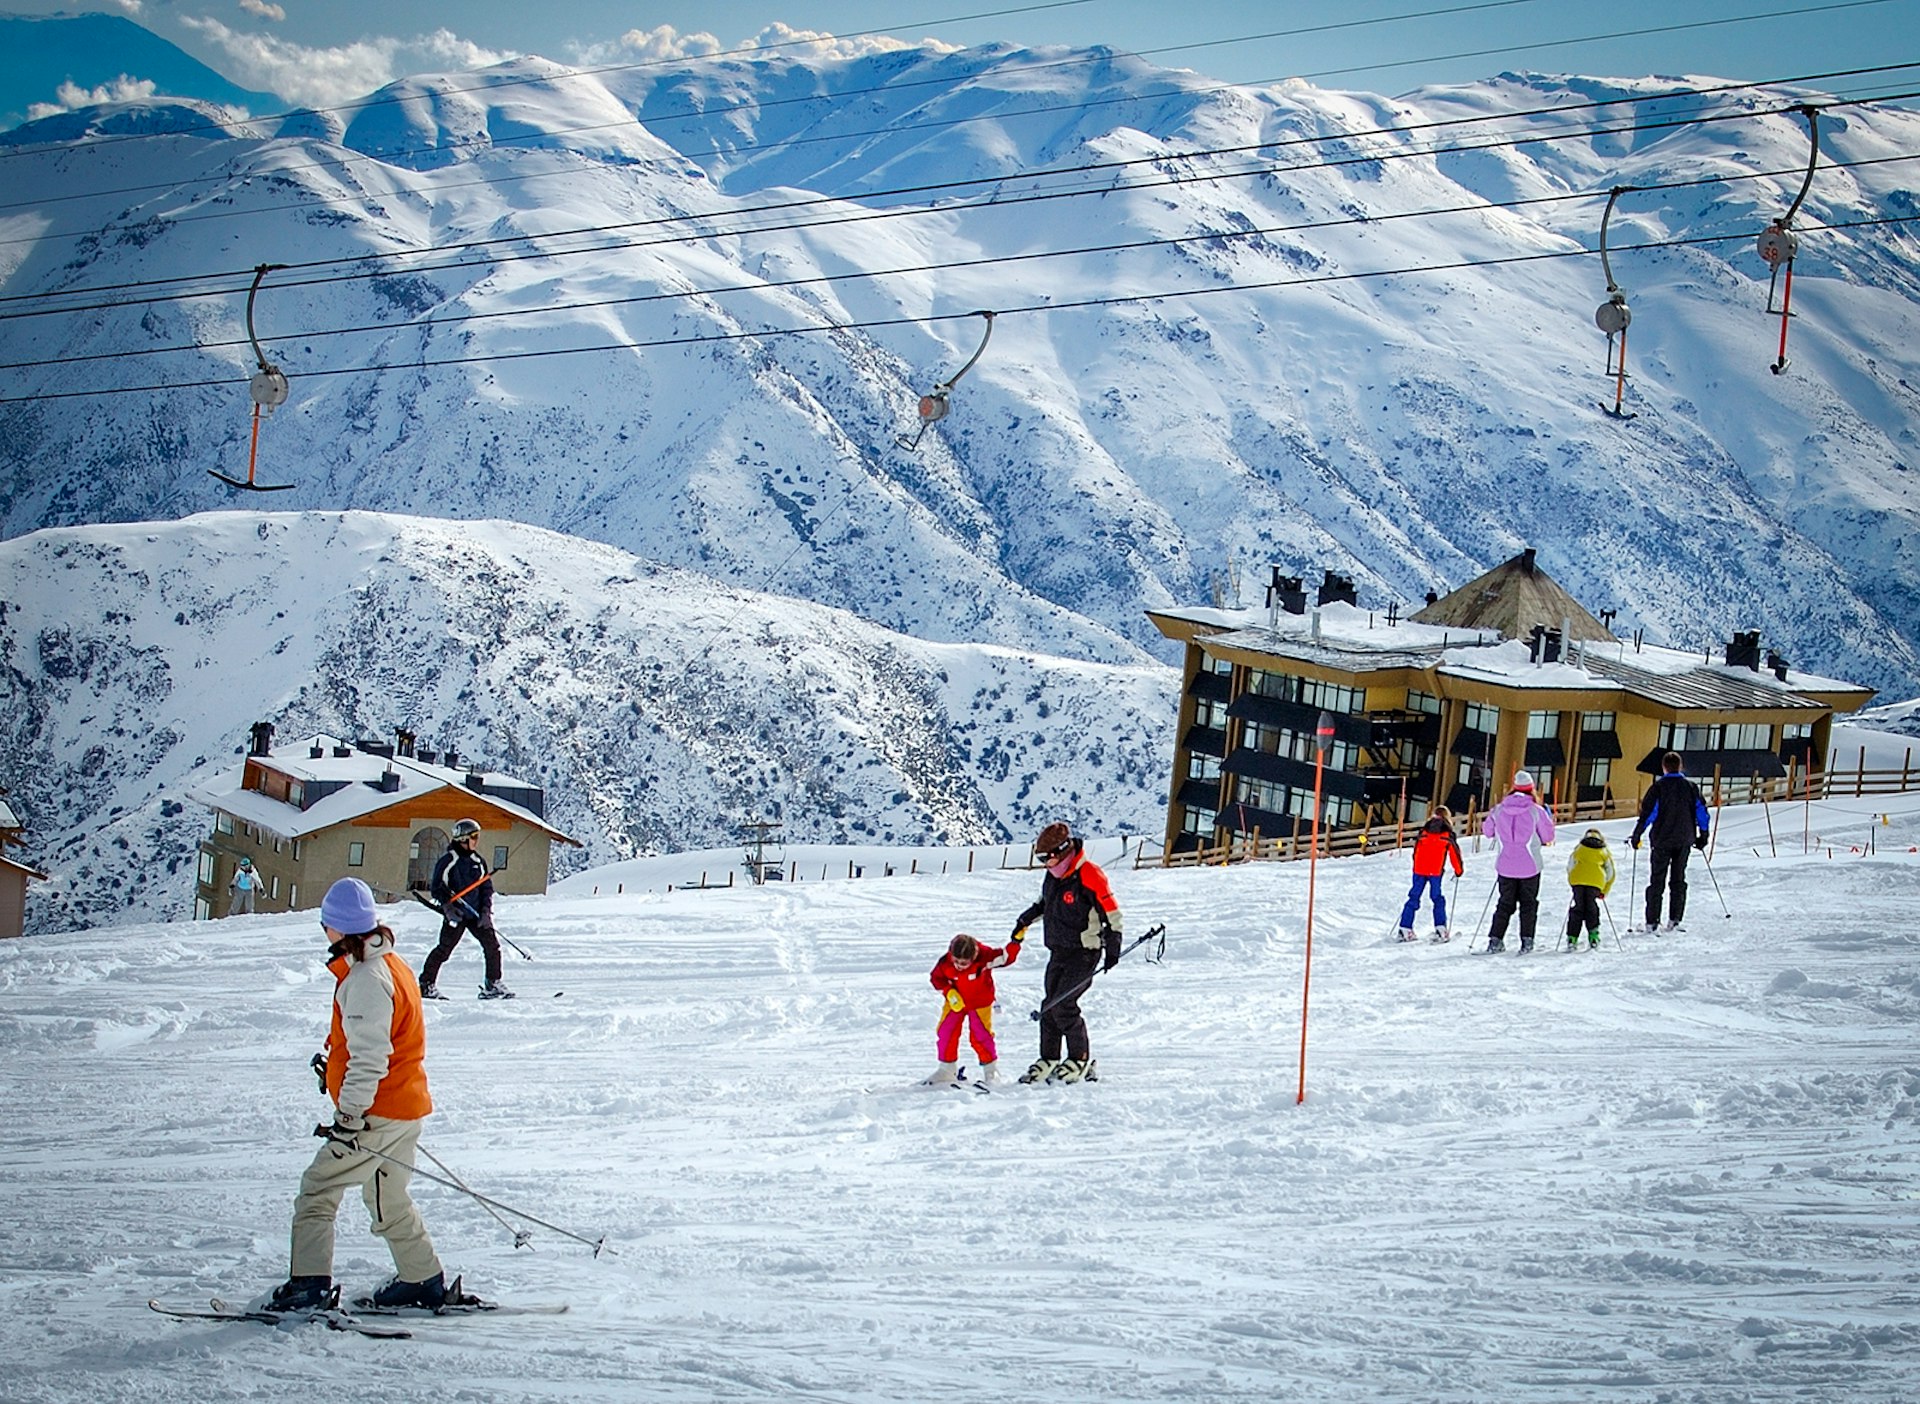 Multiple families make their way across the snow at a ski resort in Tres Valles, Chile